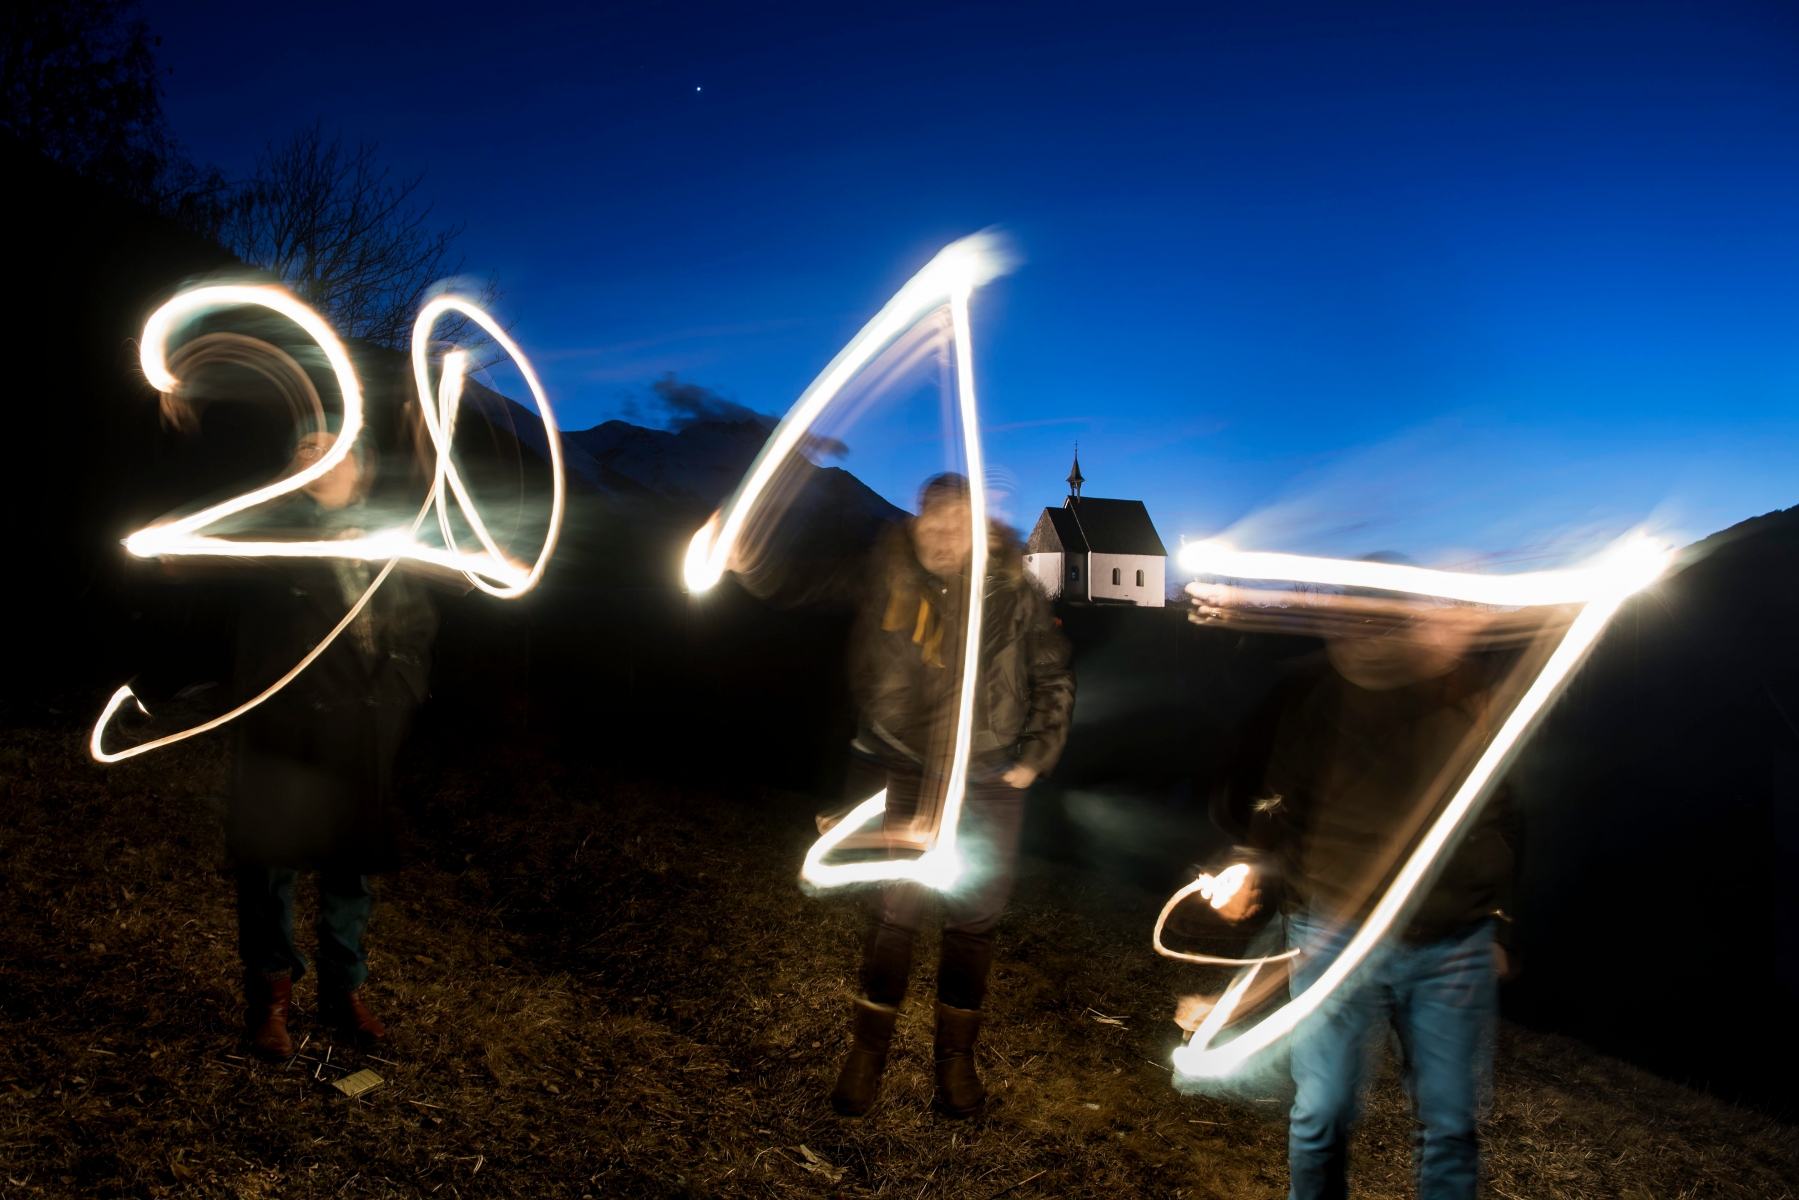 People draw the figure 2017 with a searchlight to practice for the New Year celebrations, in Muehlebach, Switzerland, late Monday, December 26, 2016. (KEYSTONE/Jean-Christophe Bott) SWITZERLAND NEW YEAR 2017